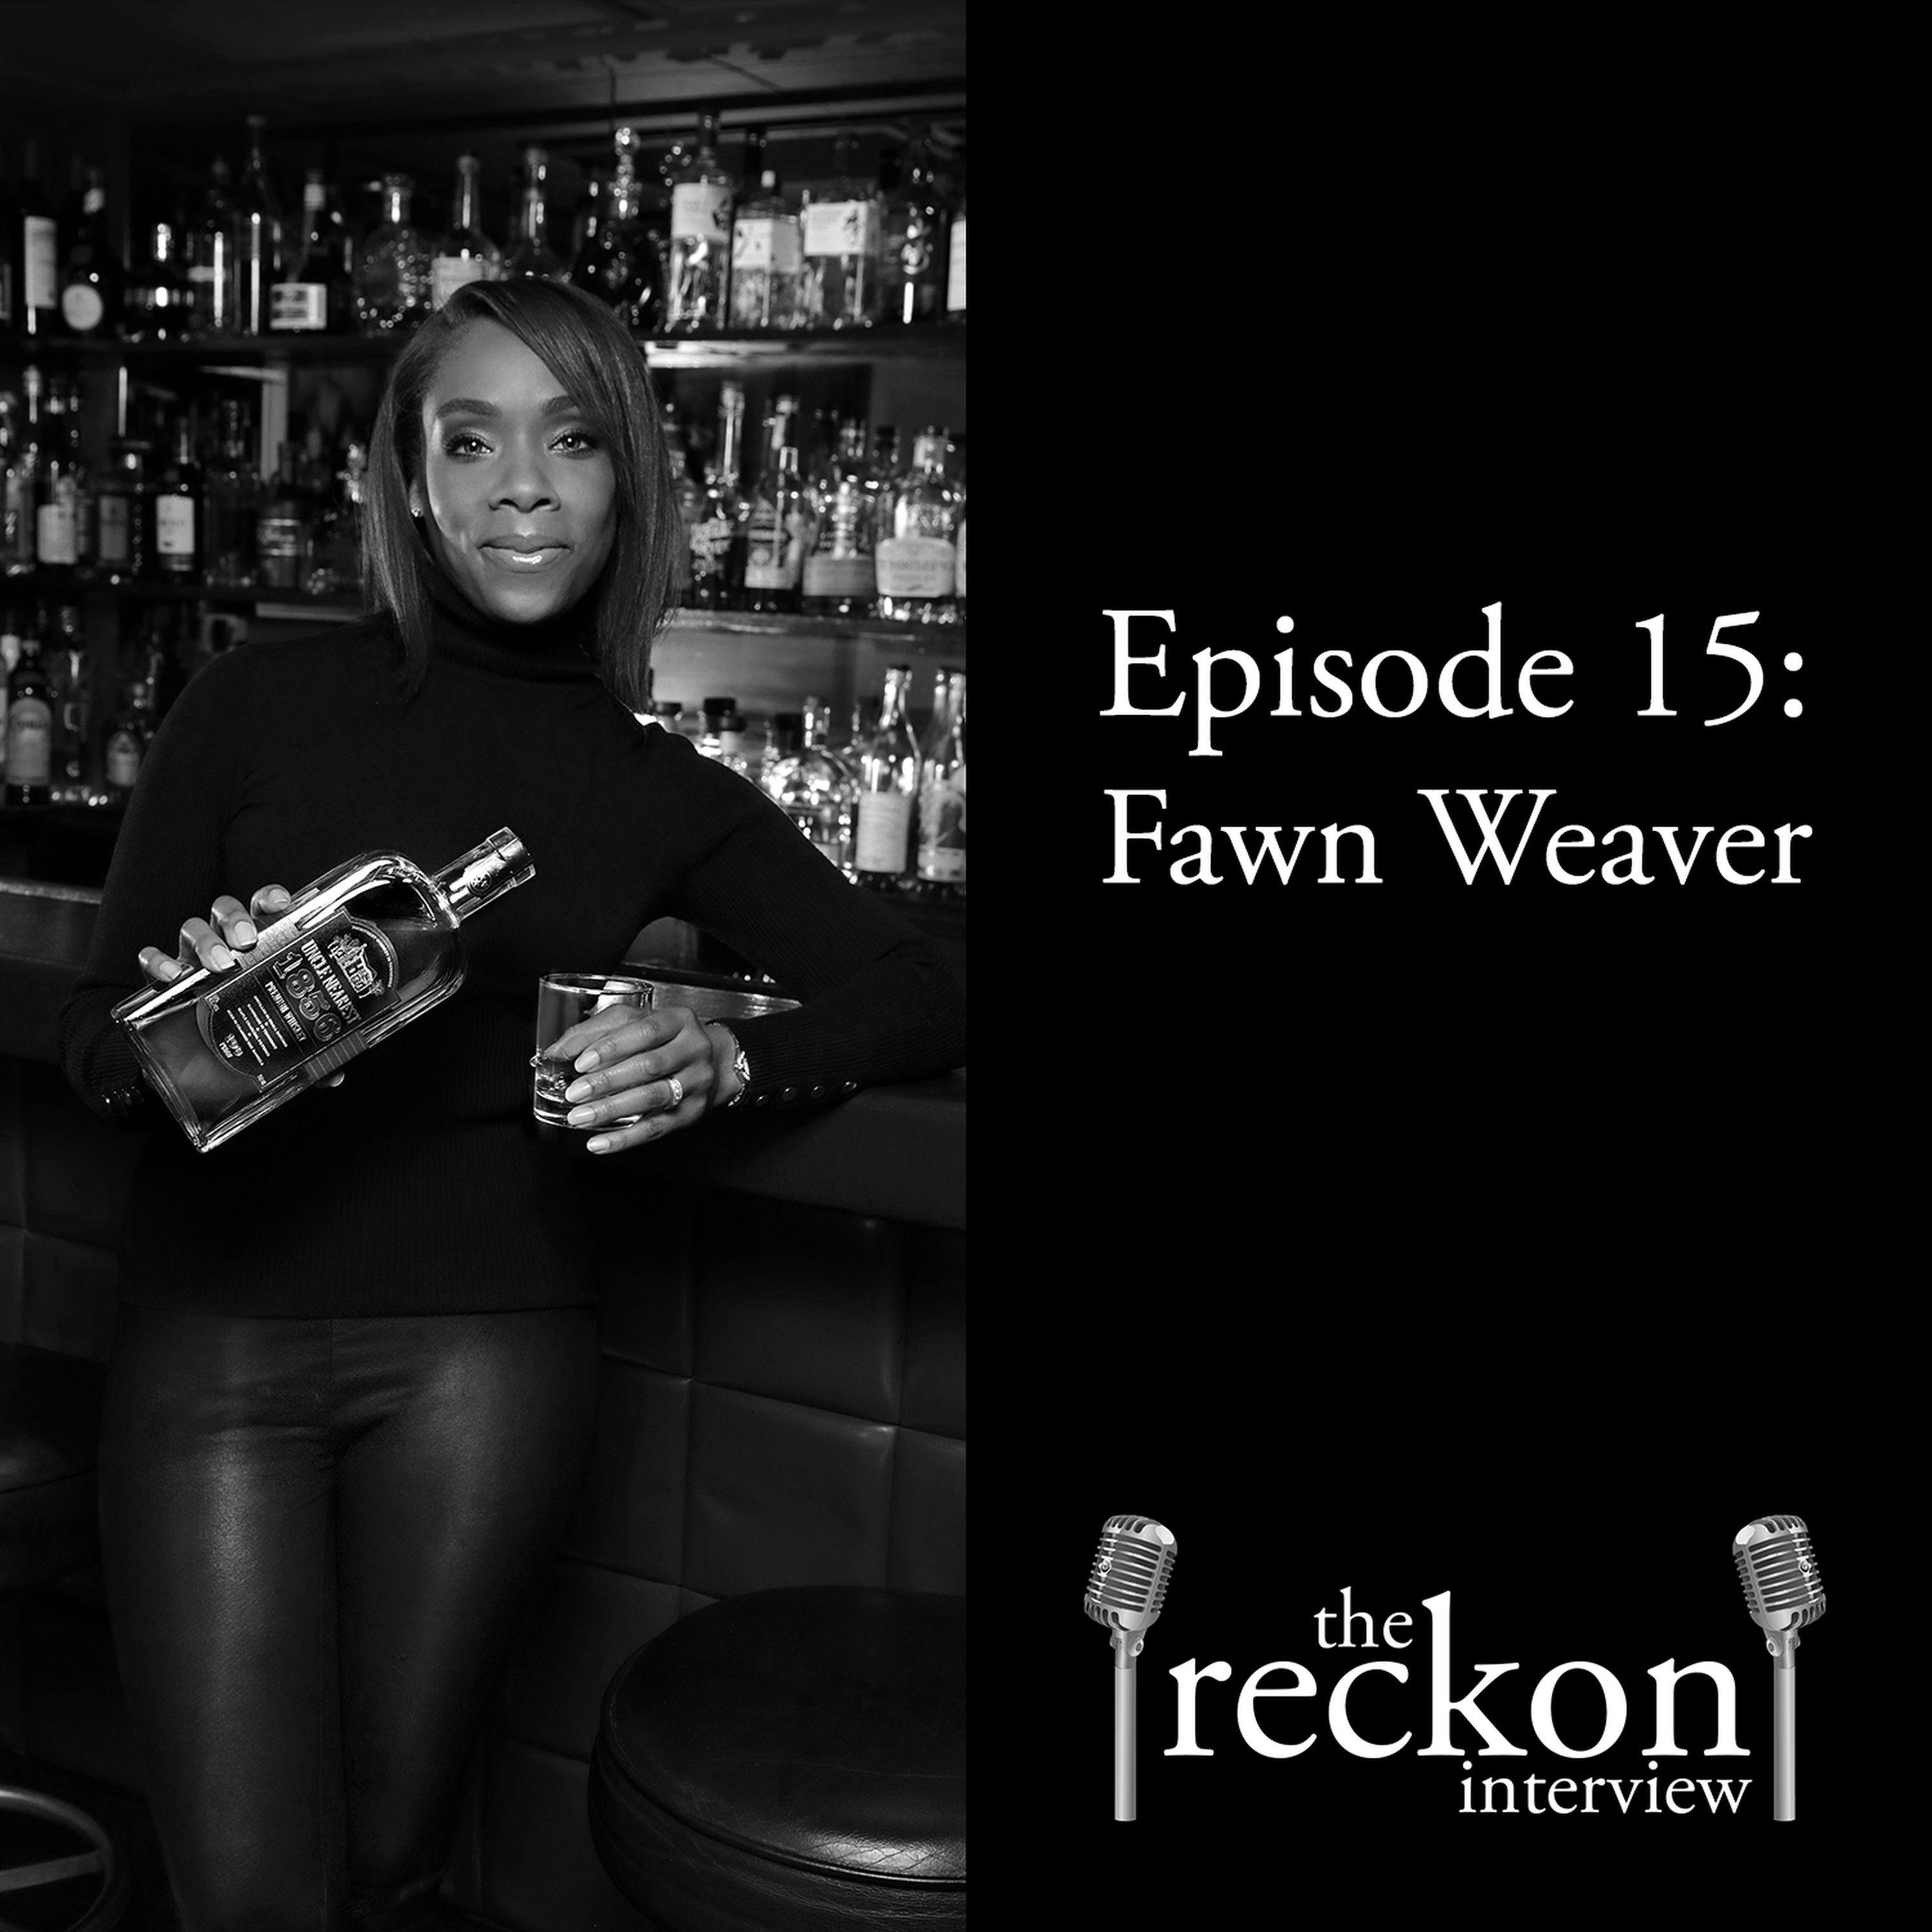 Fawn Weaver on Nearest Green, the slave who trained Jack Daniel to distill whiskey